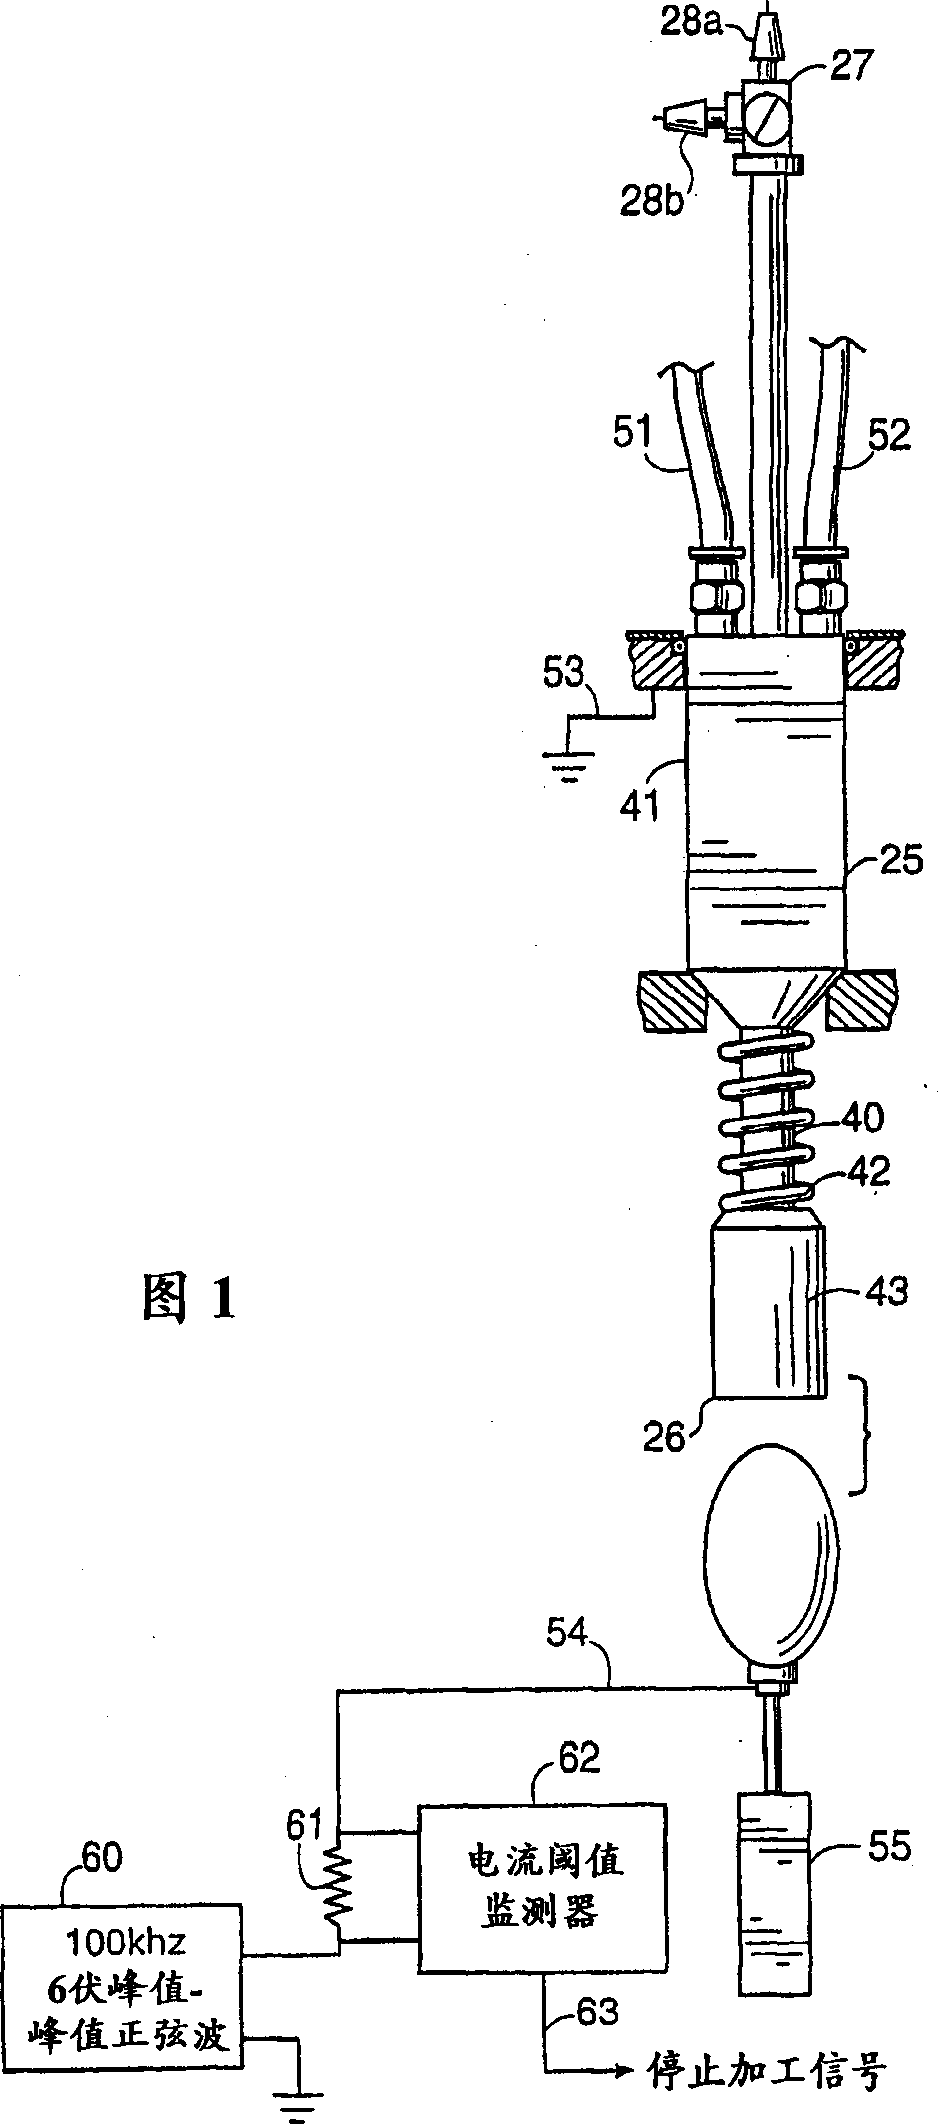 Concurrent in ovo injection and detection method and apparatus